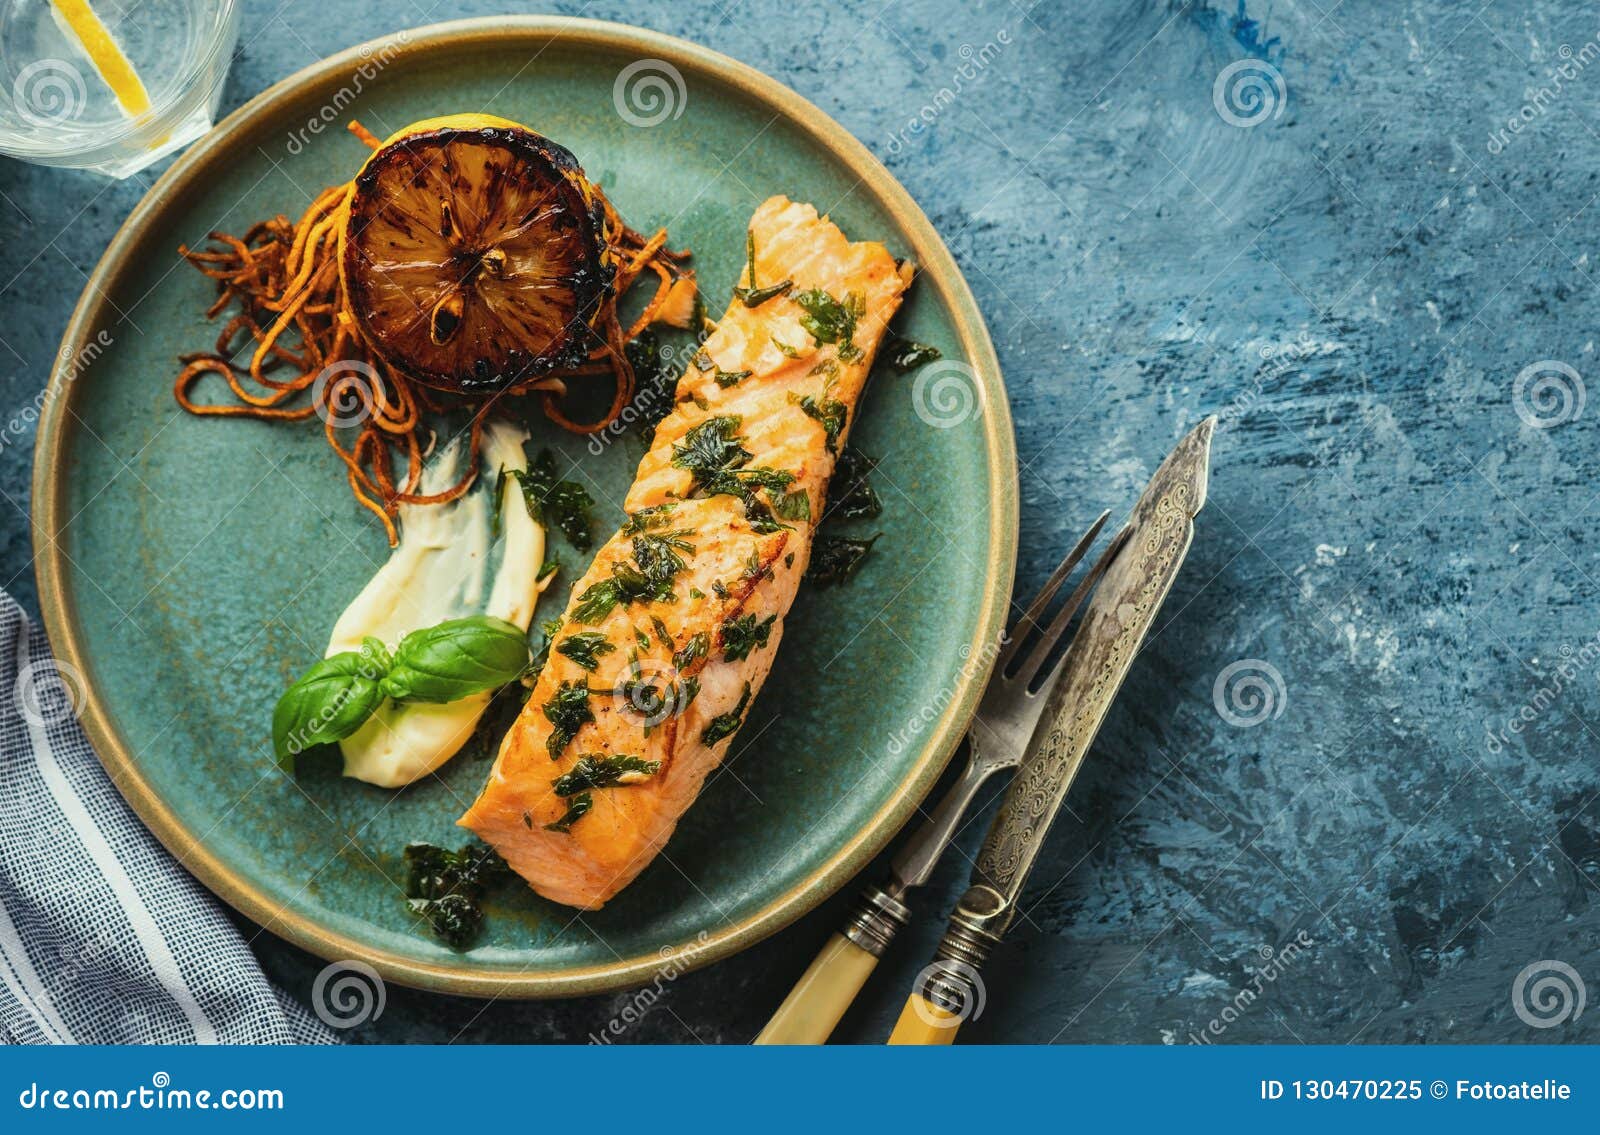 Salmon Sole Meuniere with Lemon. Fillet of Red Fish Stock Image - Image ...